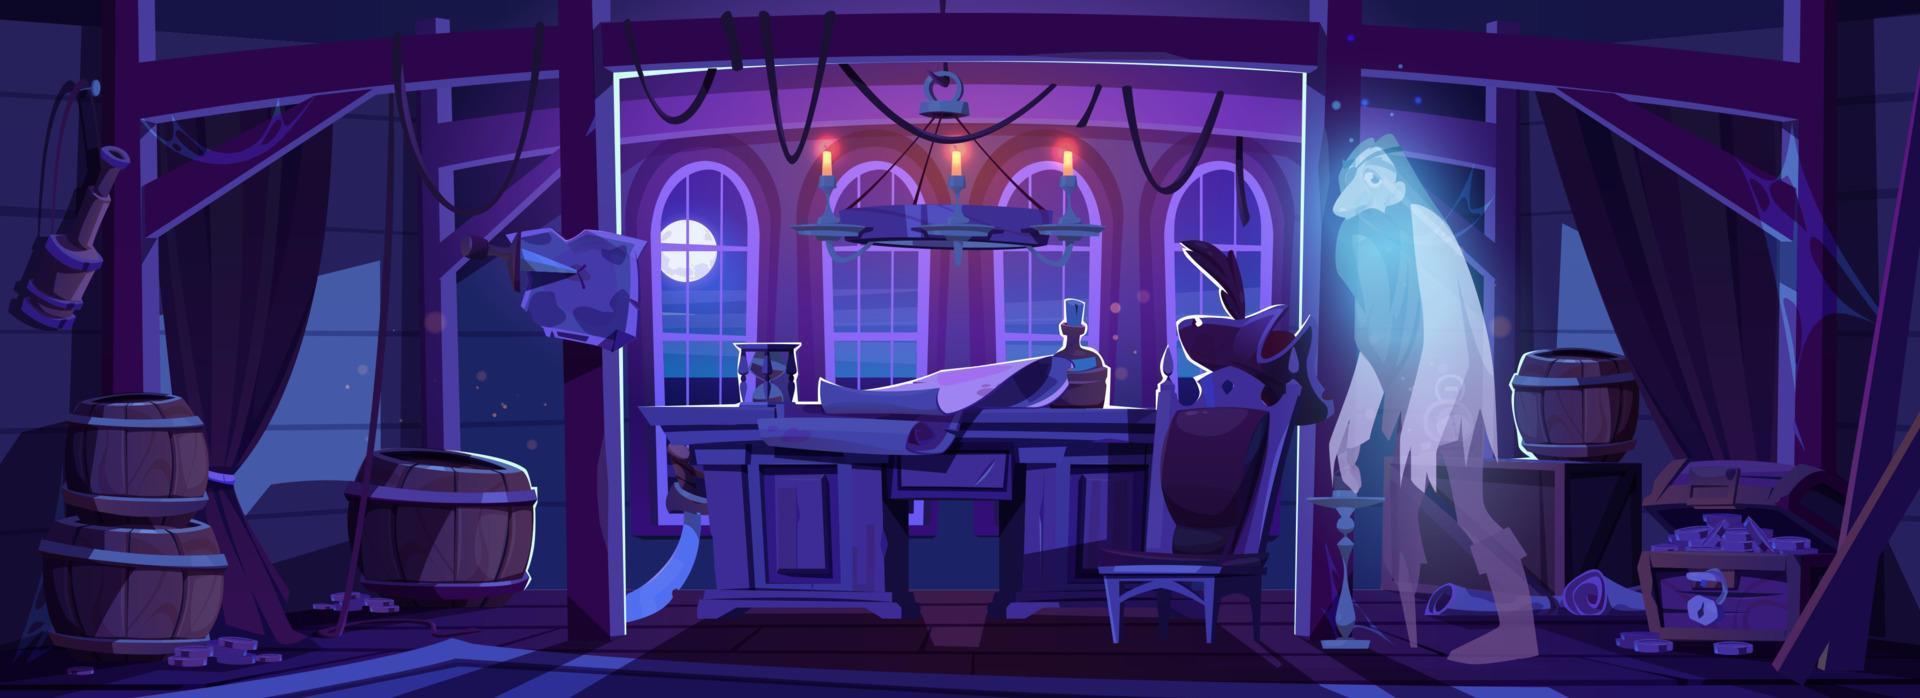 Ghost of pirate in ship cabin at night vector